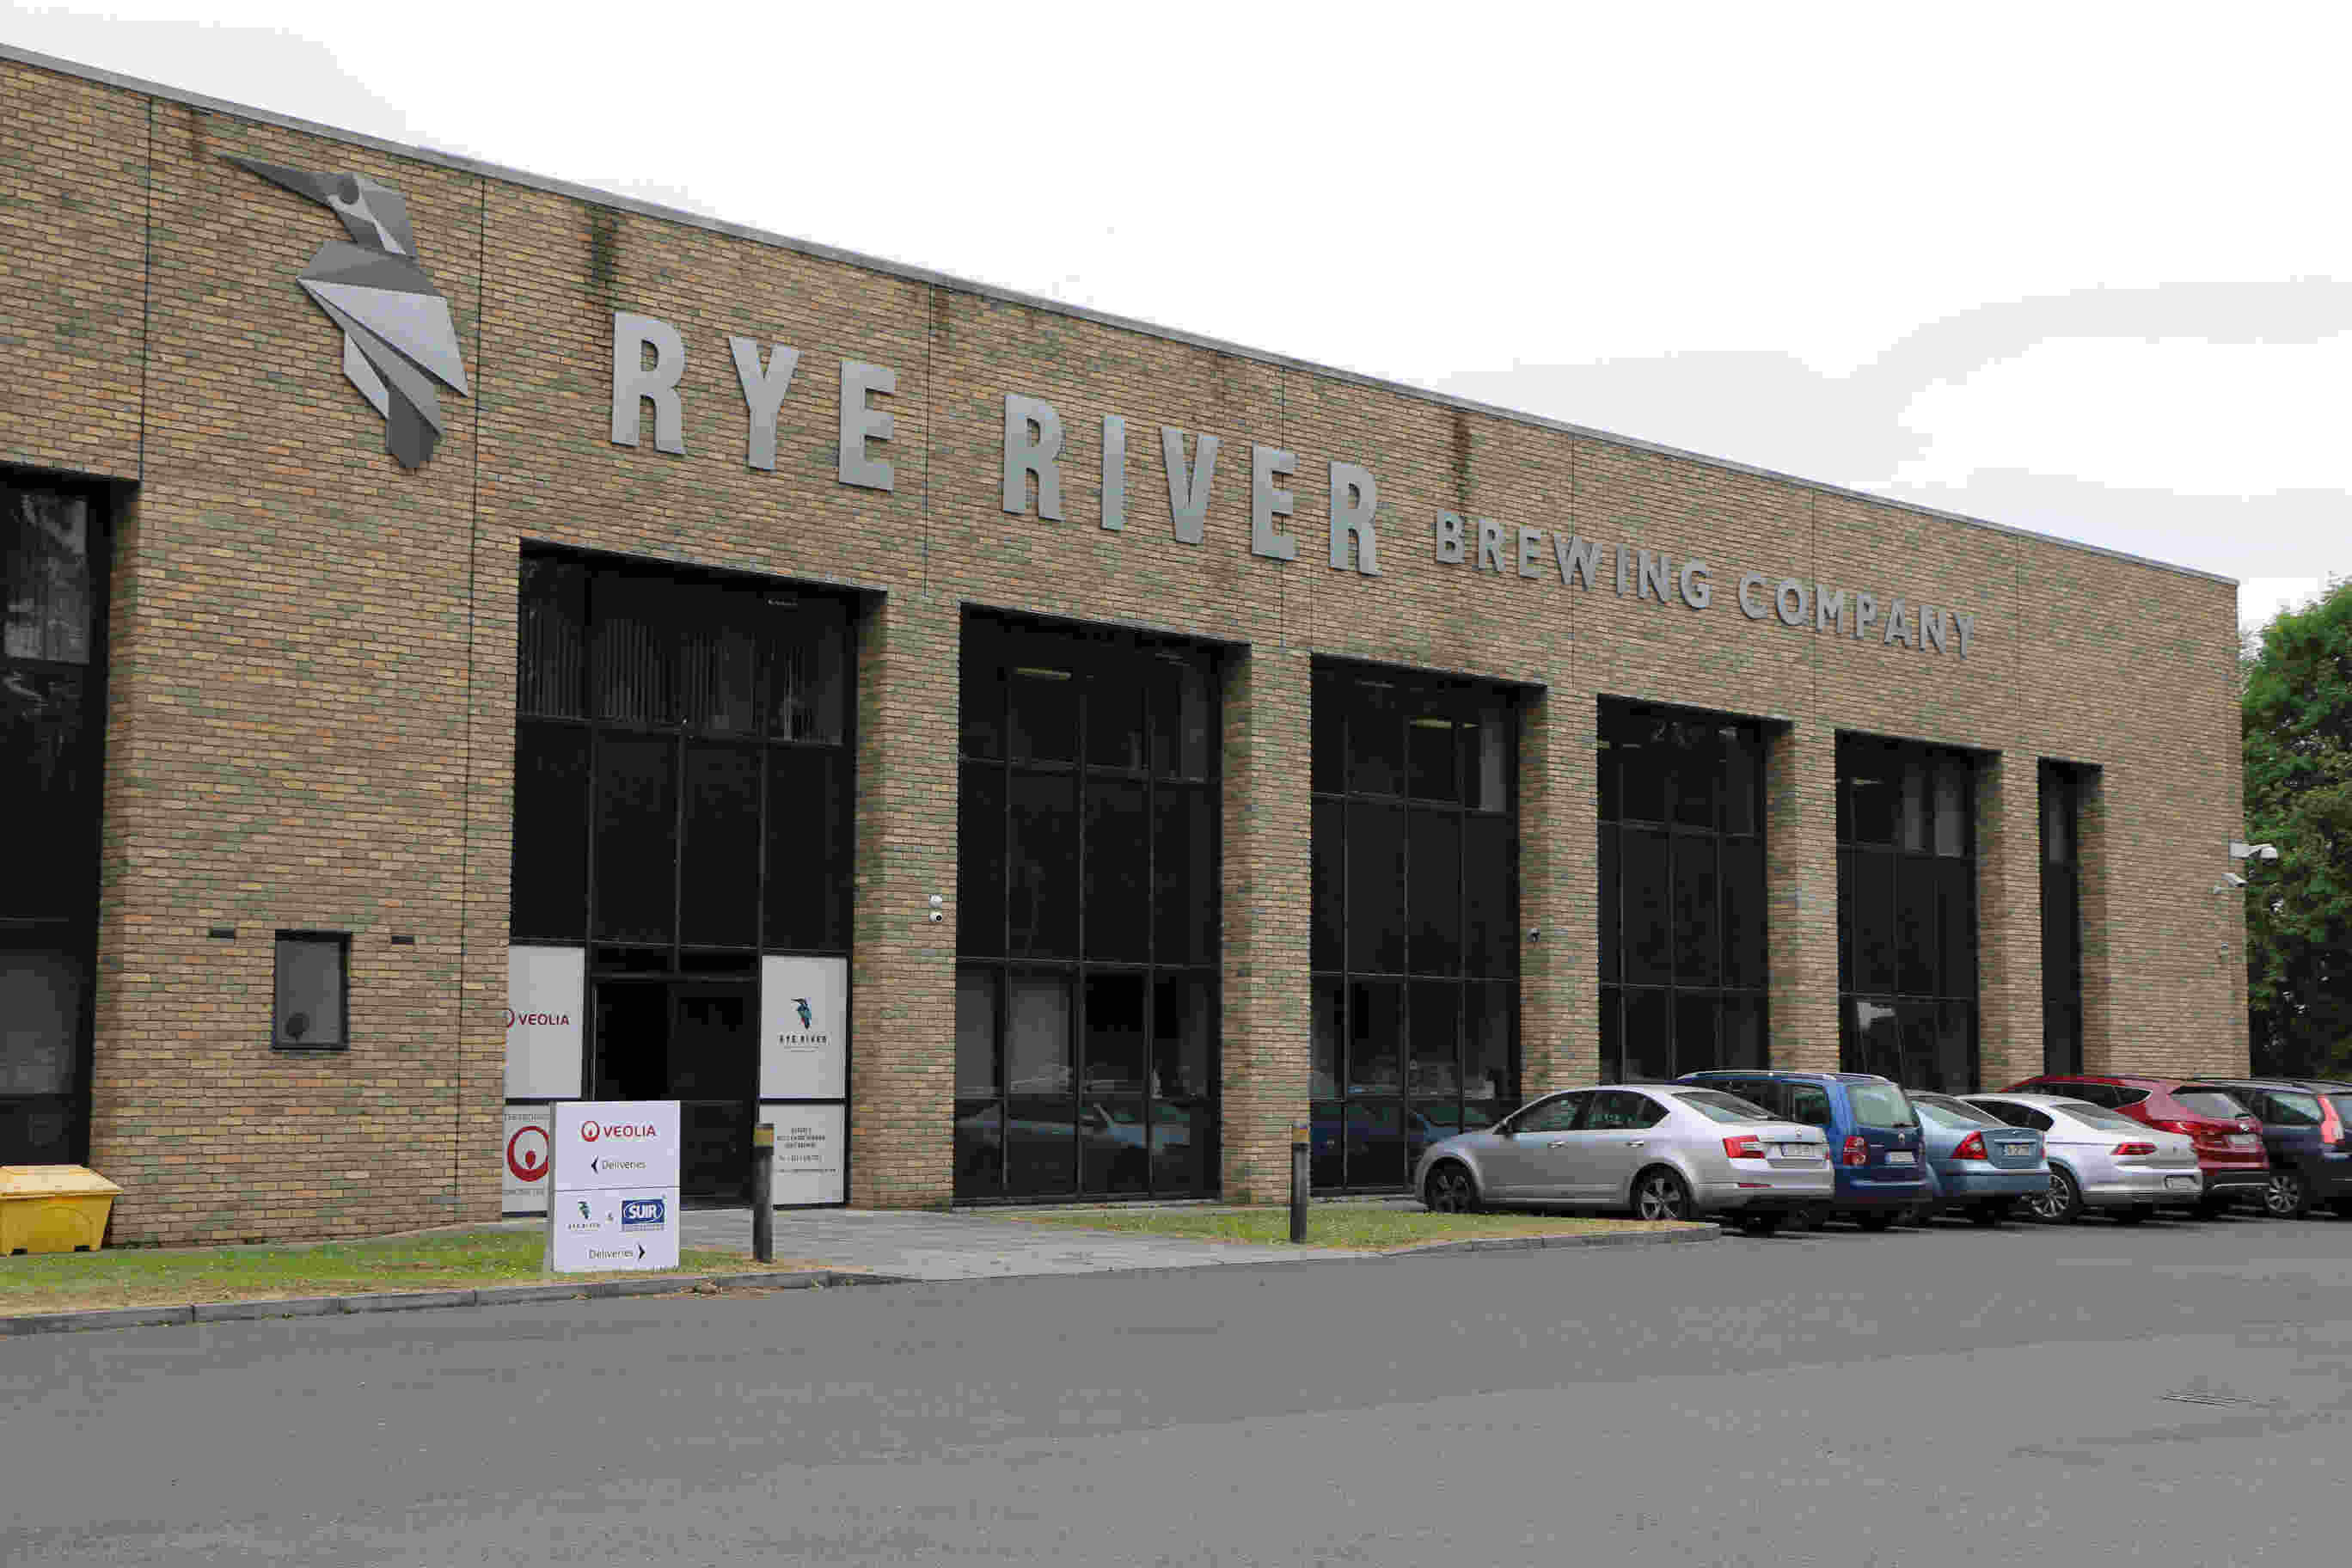 Rye River Brewing Company has won 19 awards at the World Beer Awards 2018, making it the most-awarded brewery in Europe.